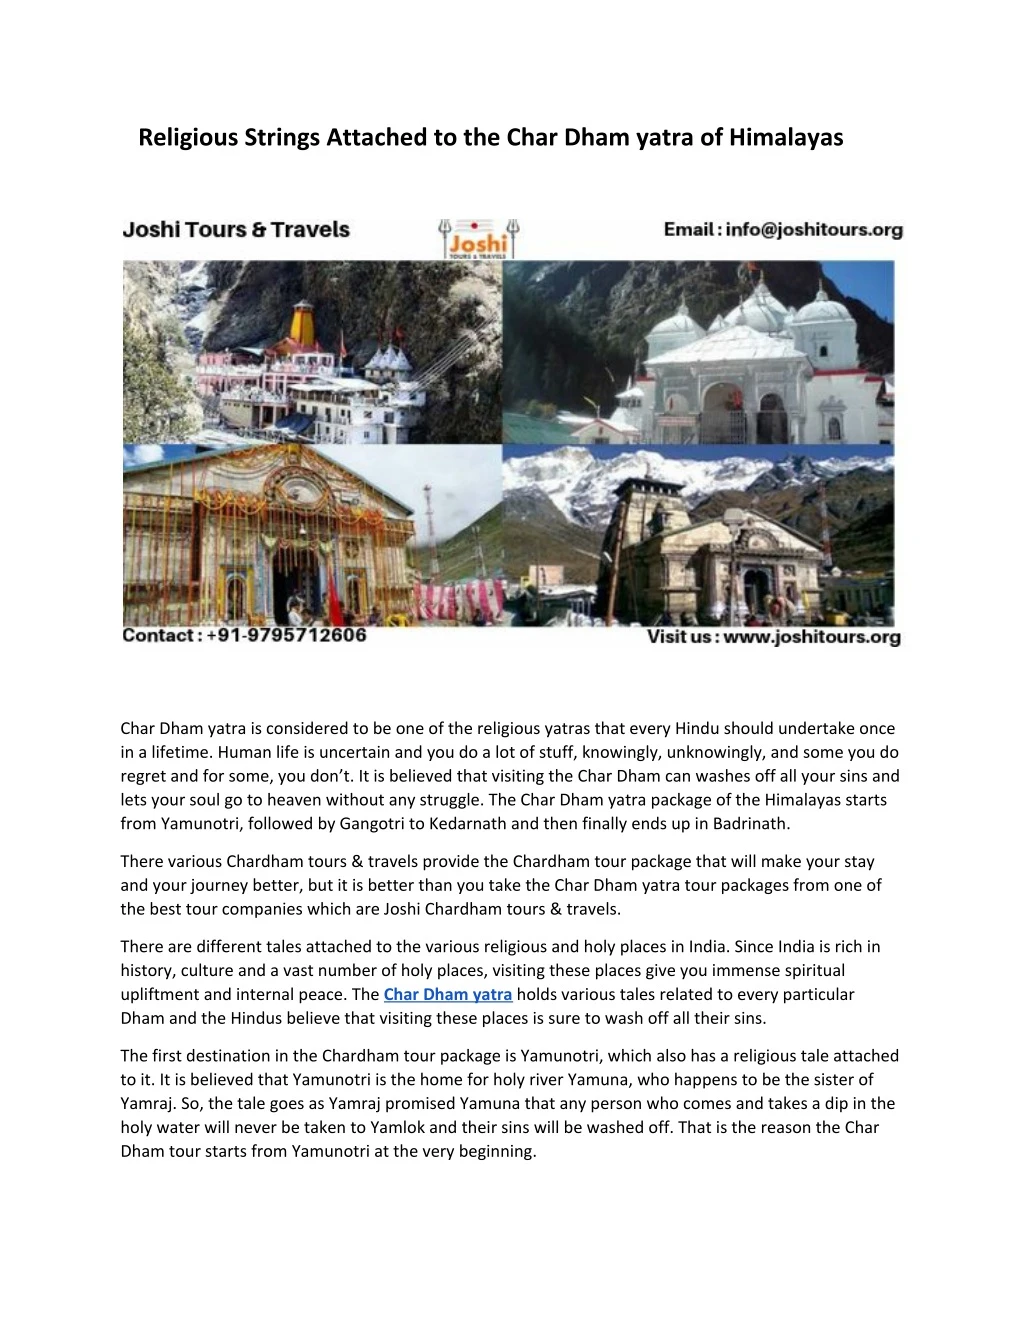 religious strings attached to the char dham yatra